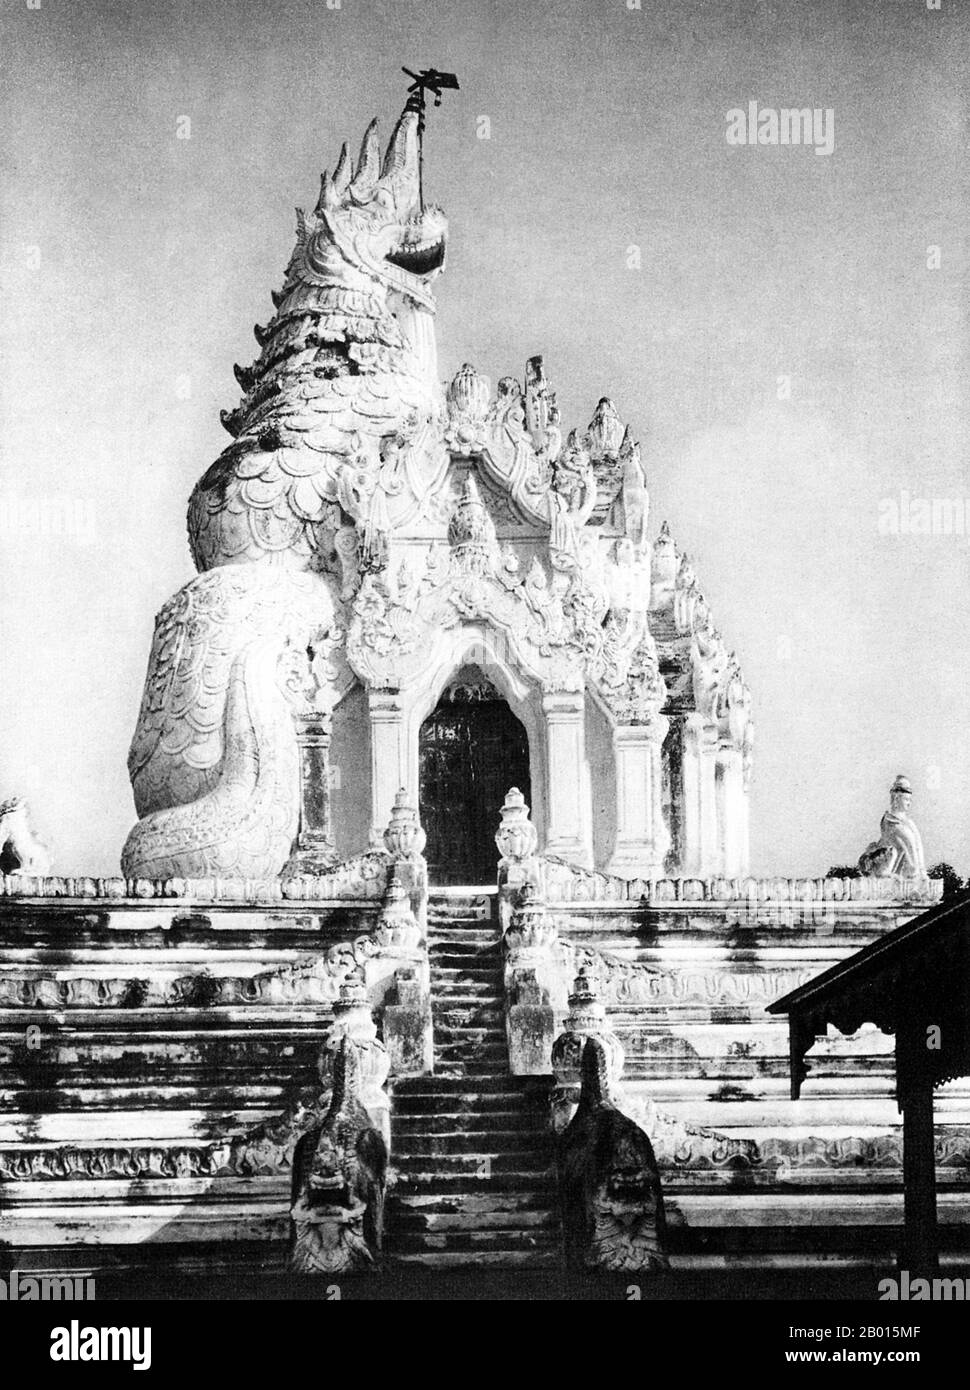 Burma/Myanmar: The dragon-shaped Ava Pagoda, c.1920s.  Ava was capital of Burma from 1364 to 1841 and was founded by King Thadominbya on an artificial island at the confluence of the Irrawaddy and the Myitnge created by digging a canal linking the two rivers. Prior to this, Sagaing had been capital, but after Sagaing fell to the Shan, the court moved across the river to Ava.  The culture of Pagan was revived and a great age of Burmese literature ensued. The kingdom lacked easily defensible borders, however, and was overrun by the Shan in 1527. Stock Photo